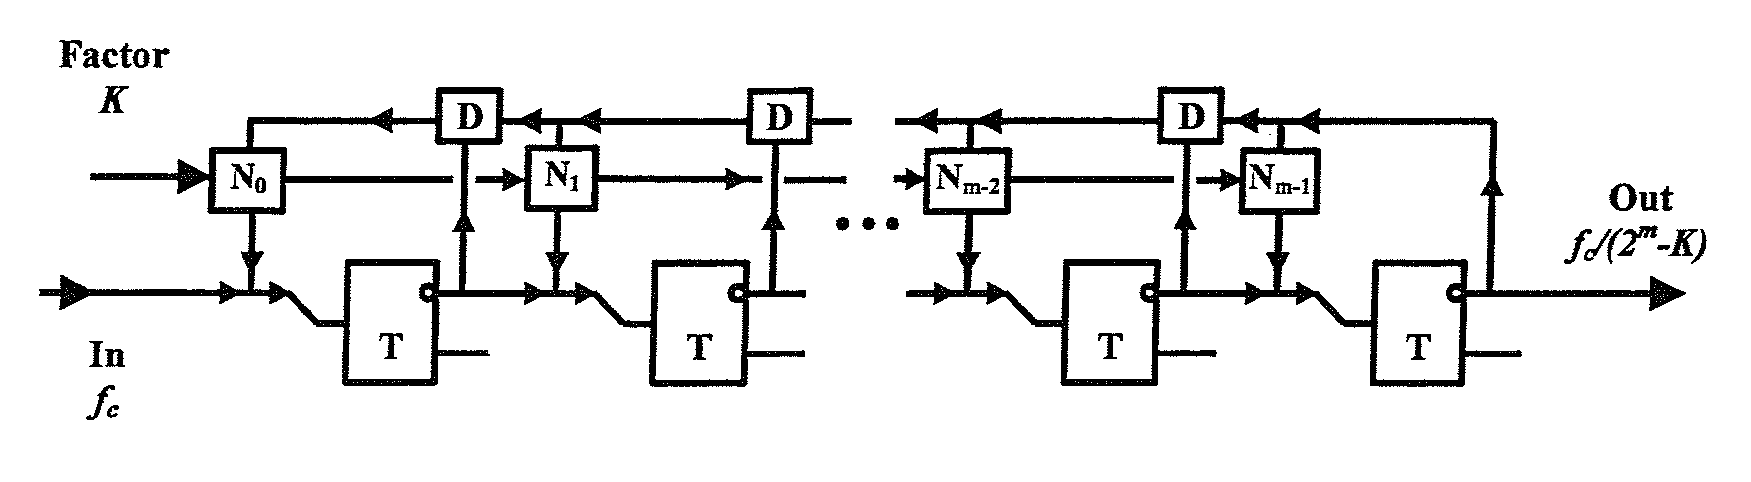 Digital programmable frequency divider